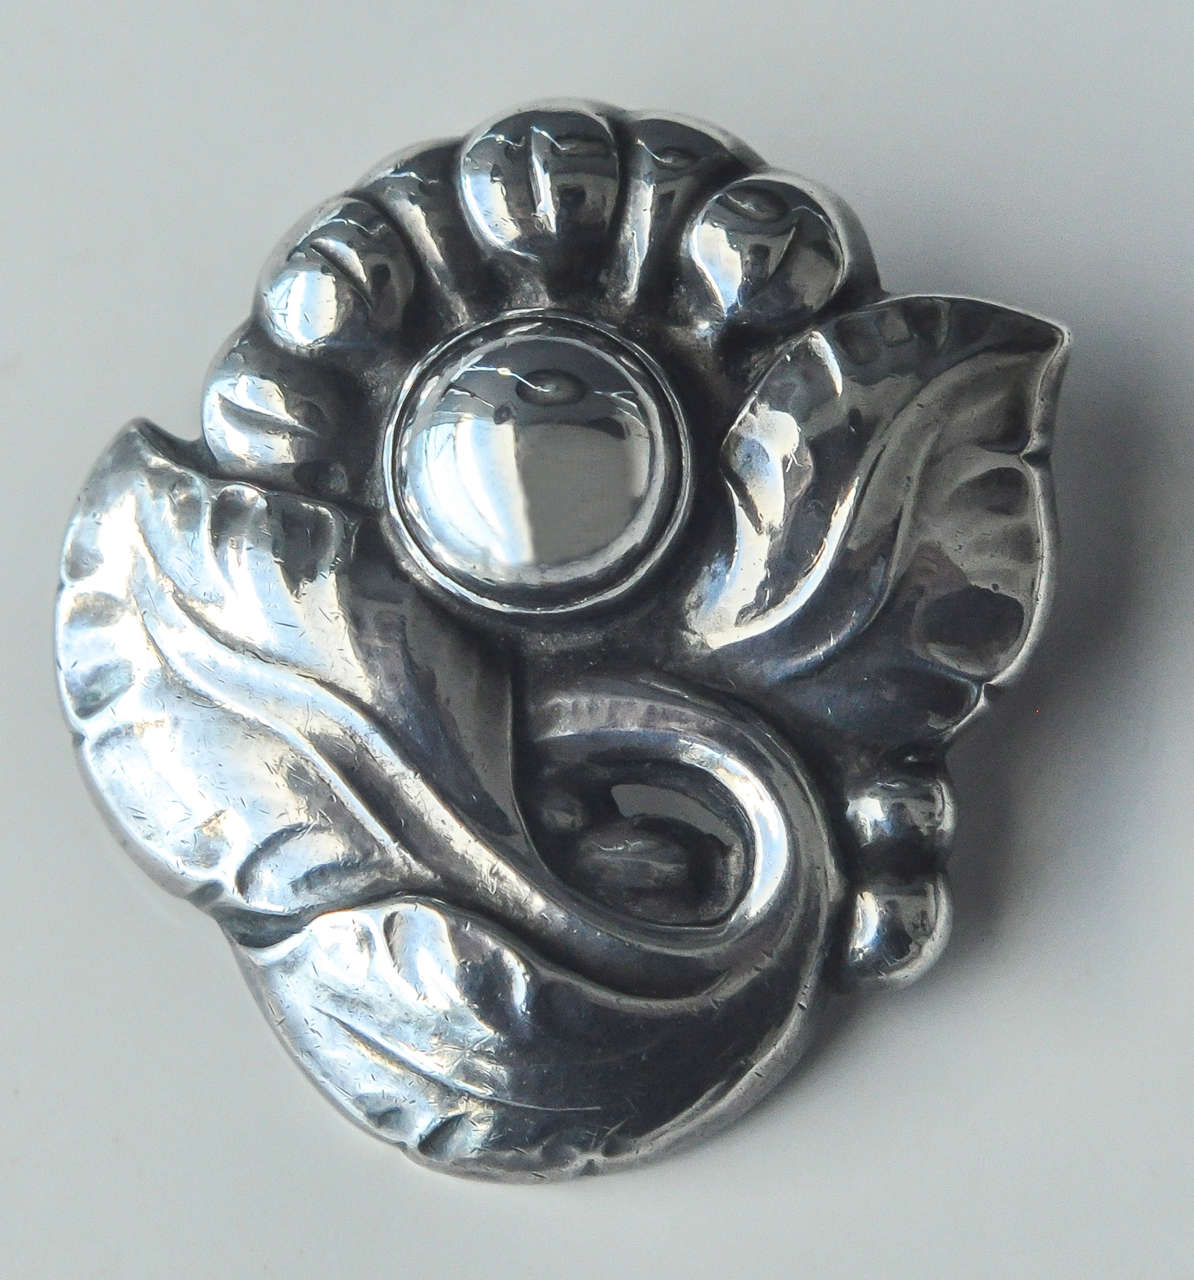 This stylized flower brooch is a very early example of Georg Jensen jewelry dating from c. 1909-14.  Pieces from this early period are scarce.